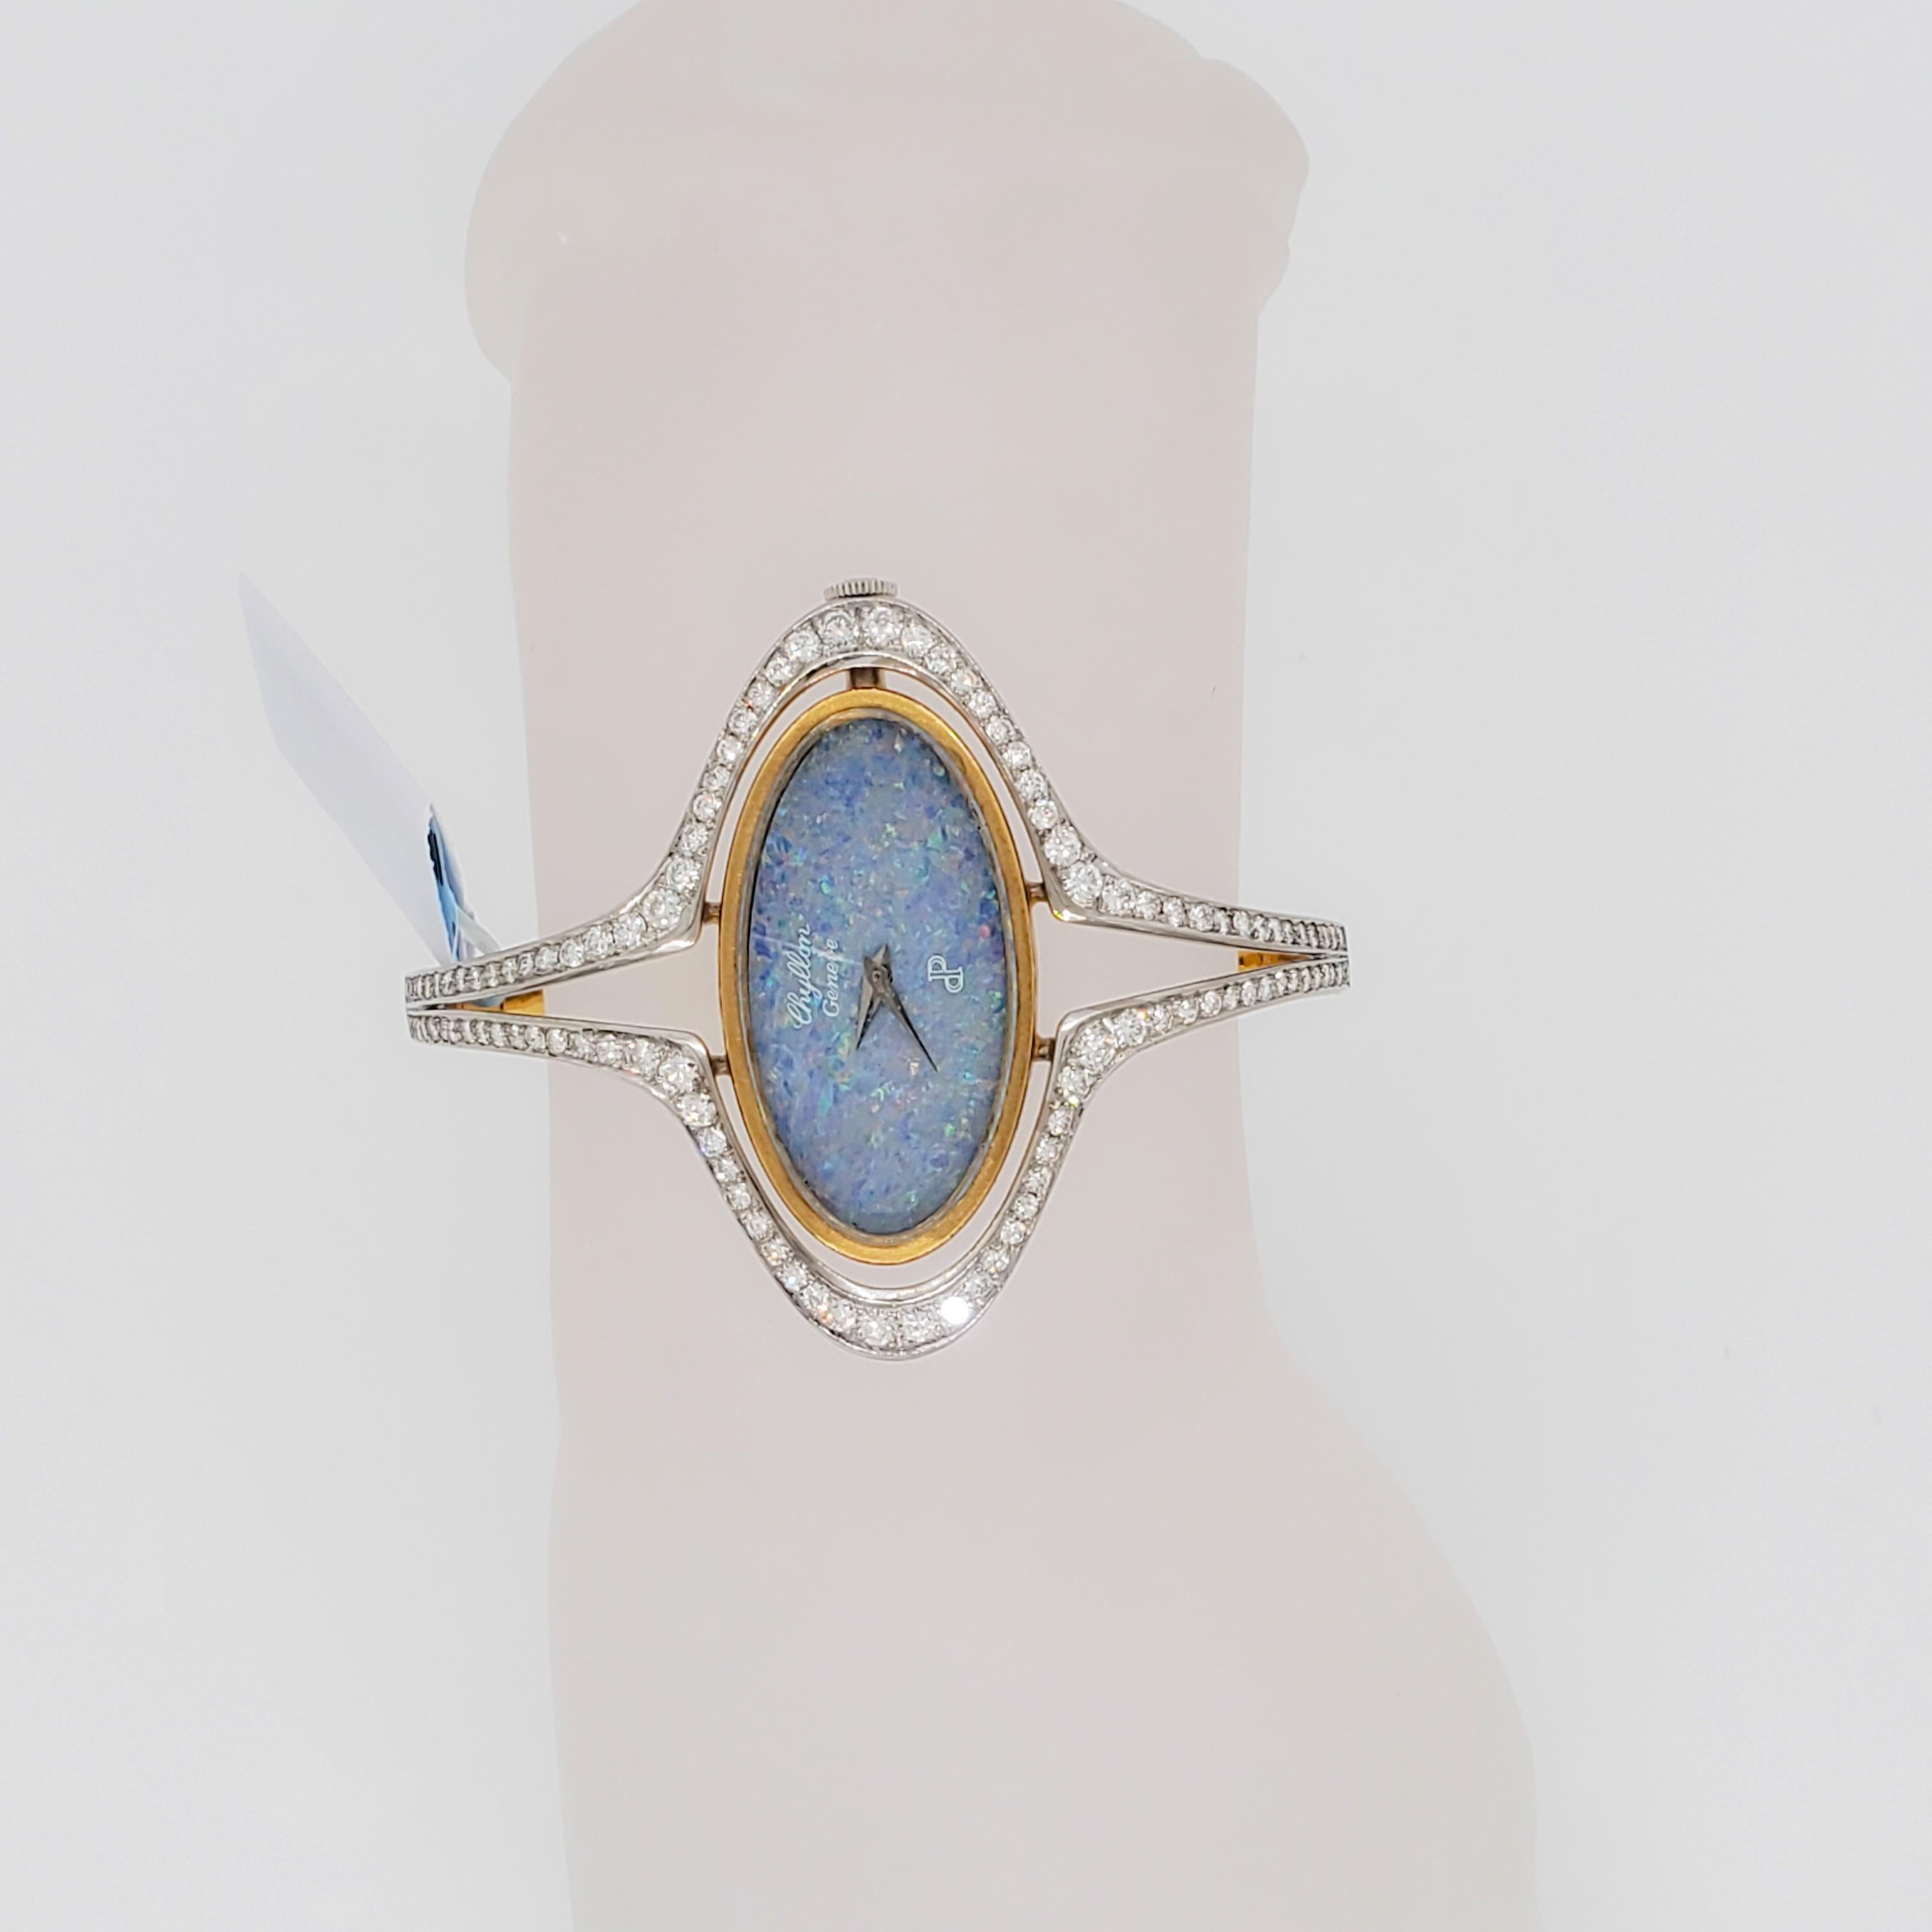 Gorgeous Chyllon Geneve bangle watch featuring opal and white diamonds in 18k white and yellow gold.  